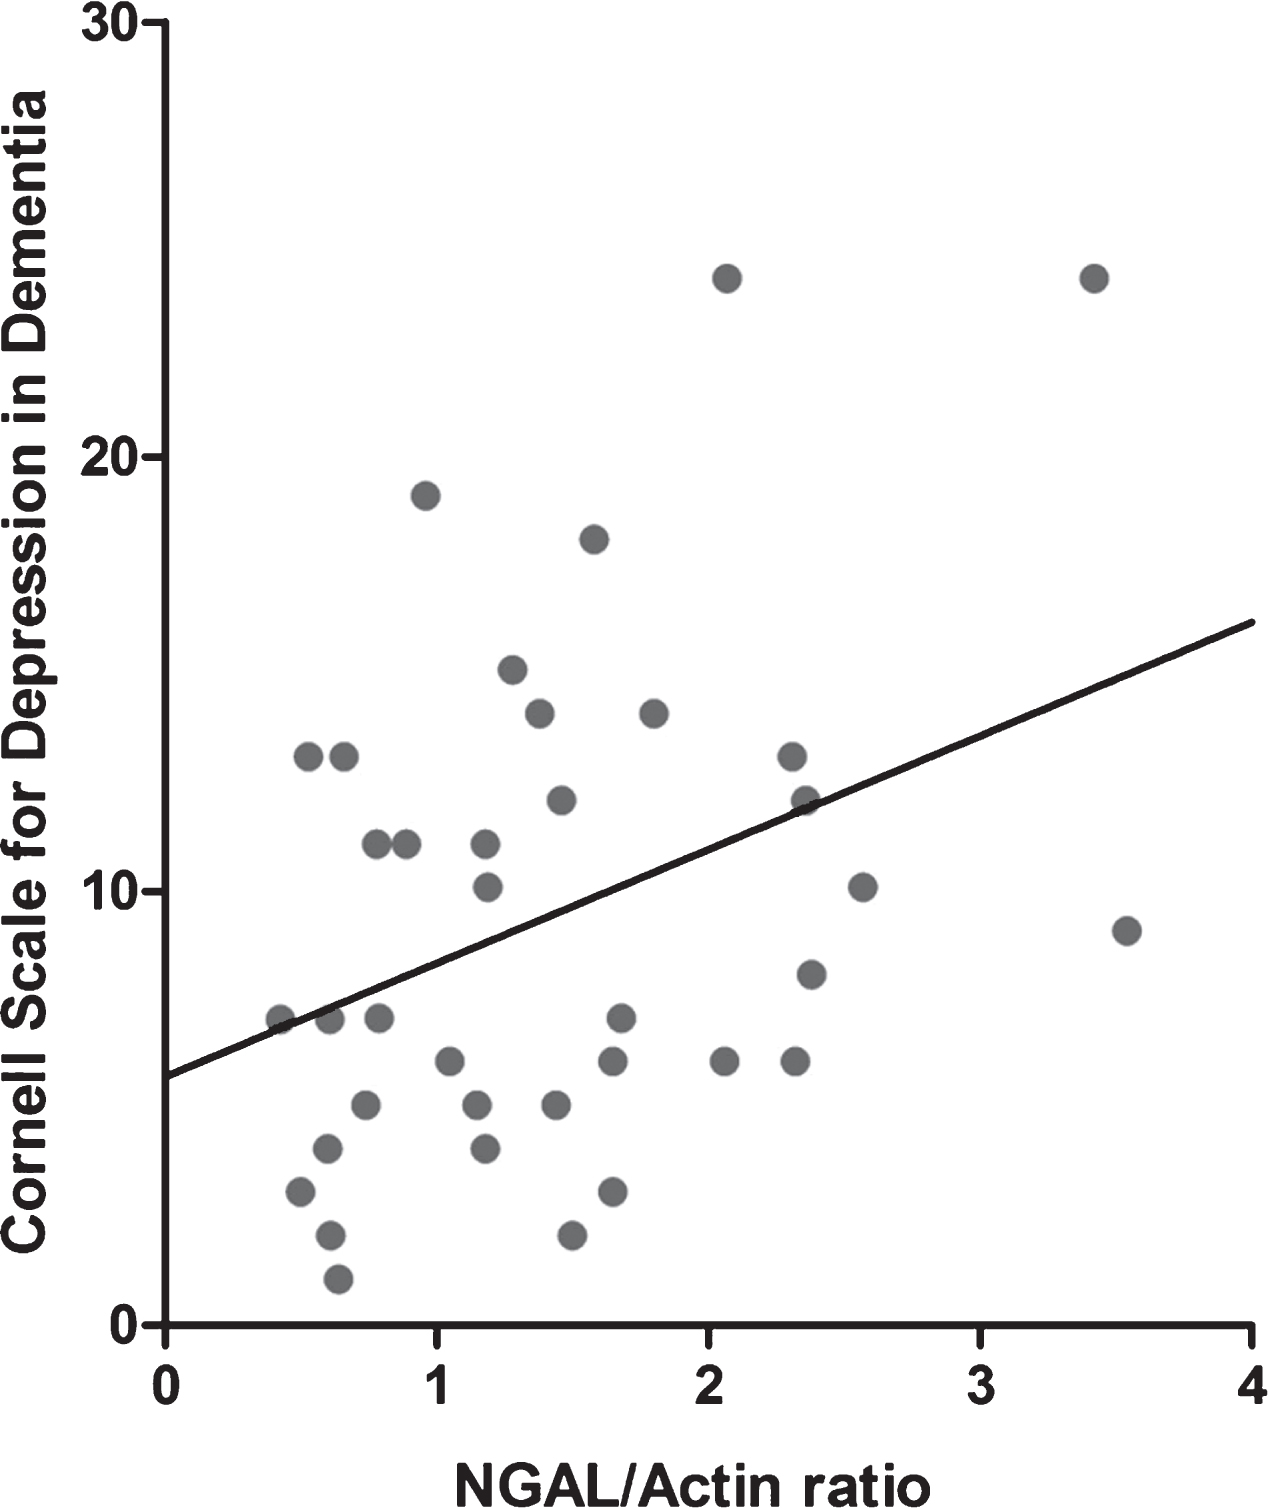 Pearson correlation between hippocampal NGAL levels and CSDD depression score, in all AD patients. r = 0.359 and p = 0.027.